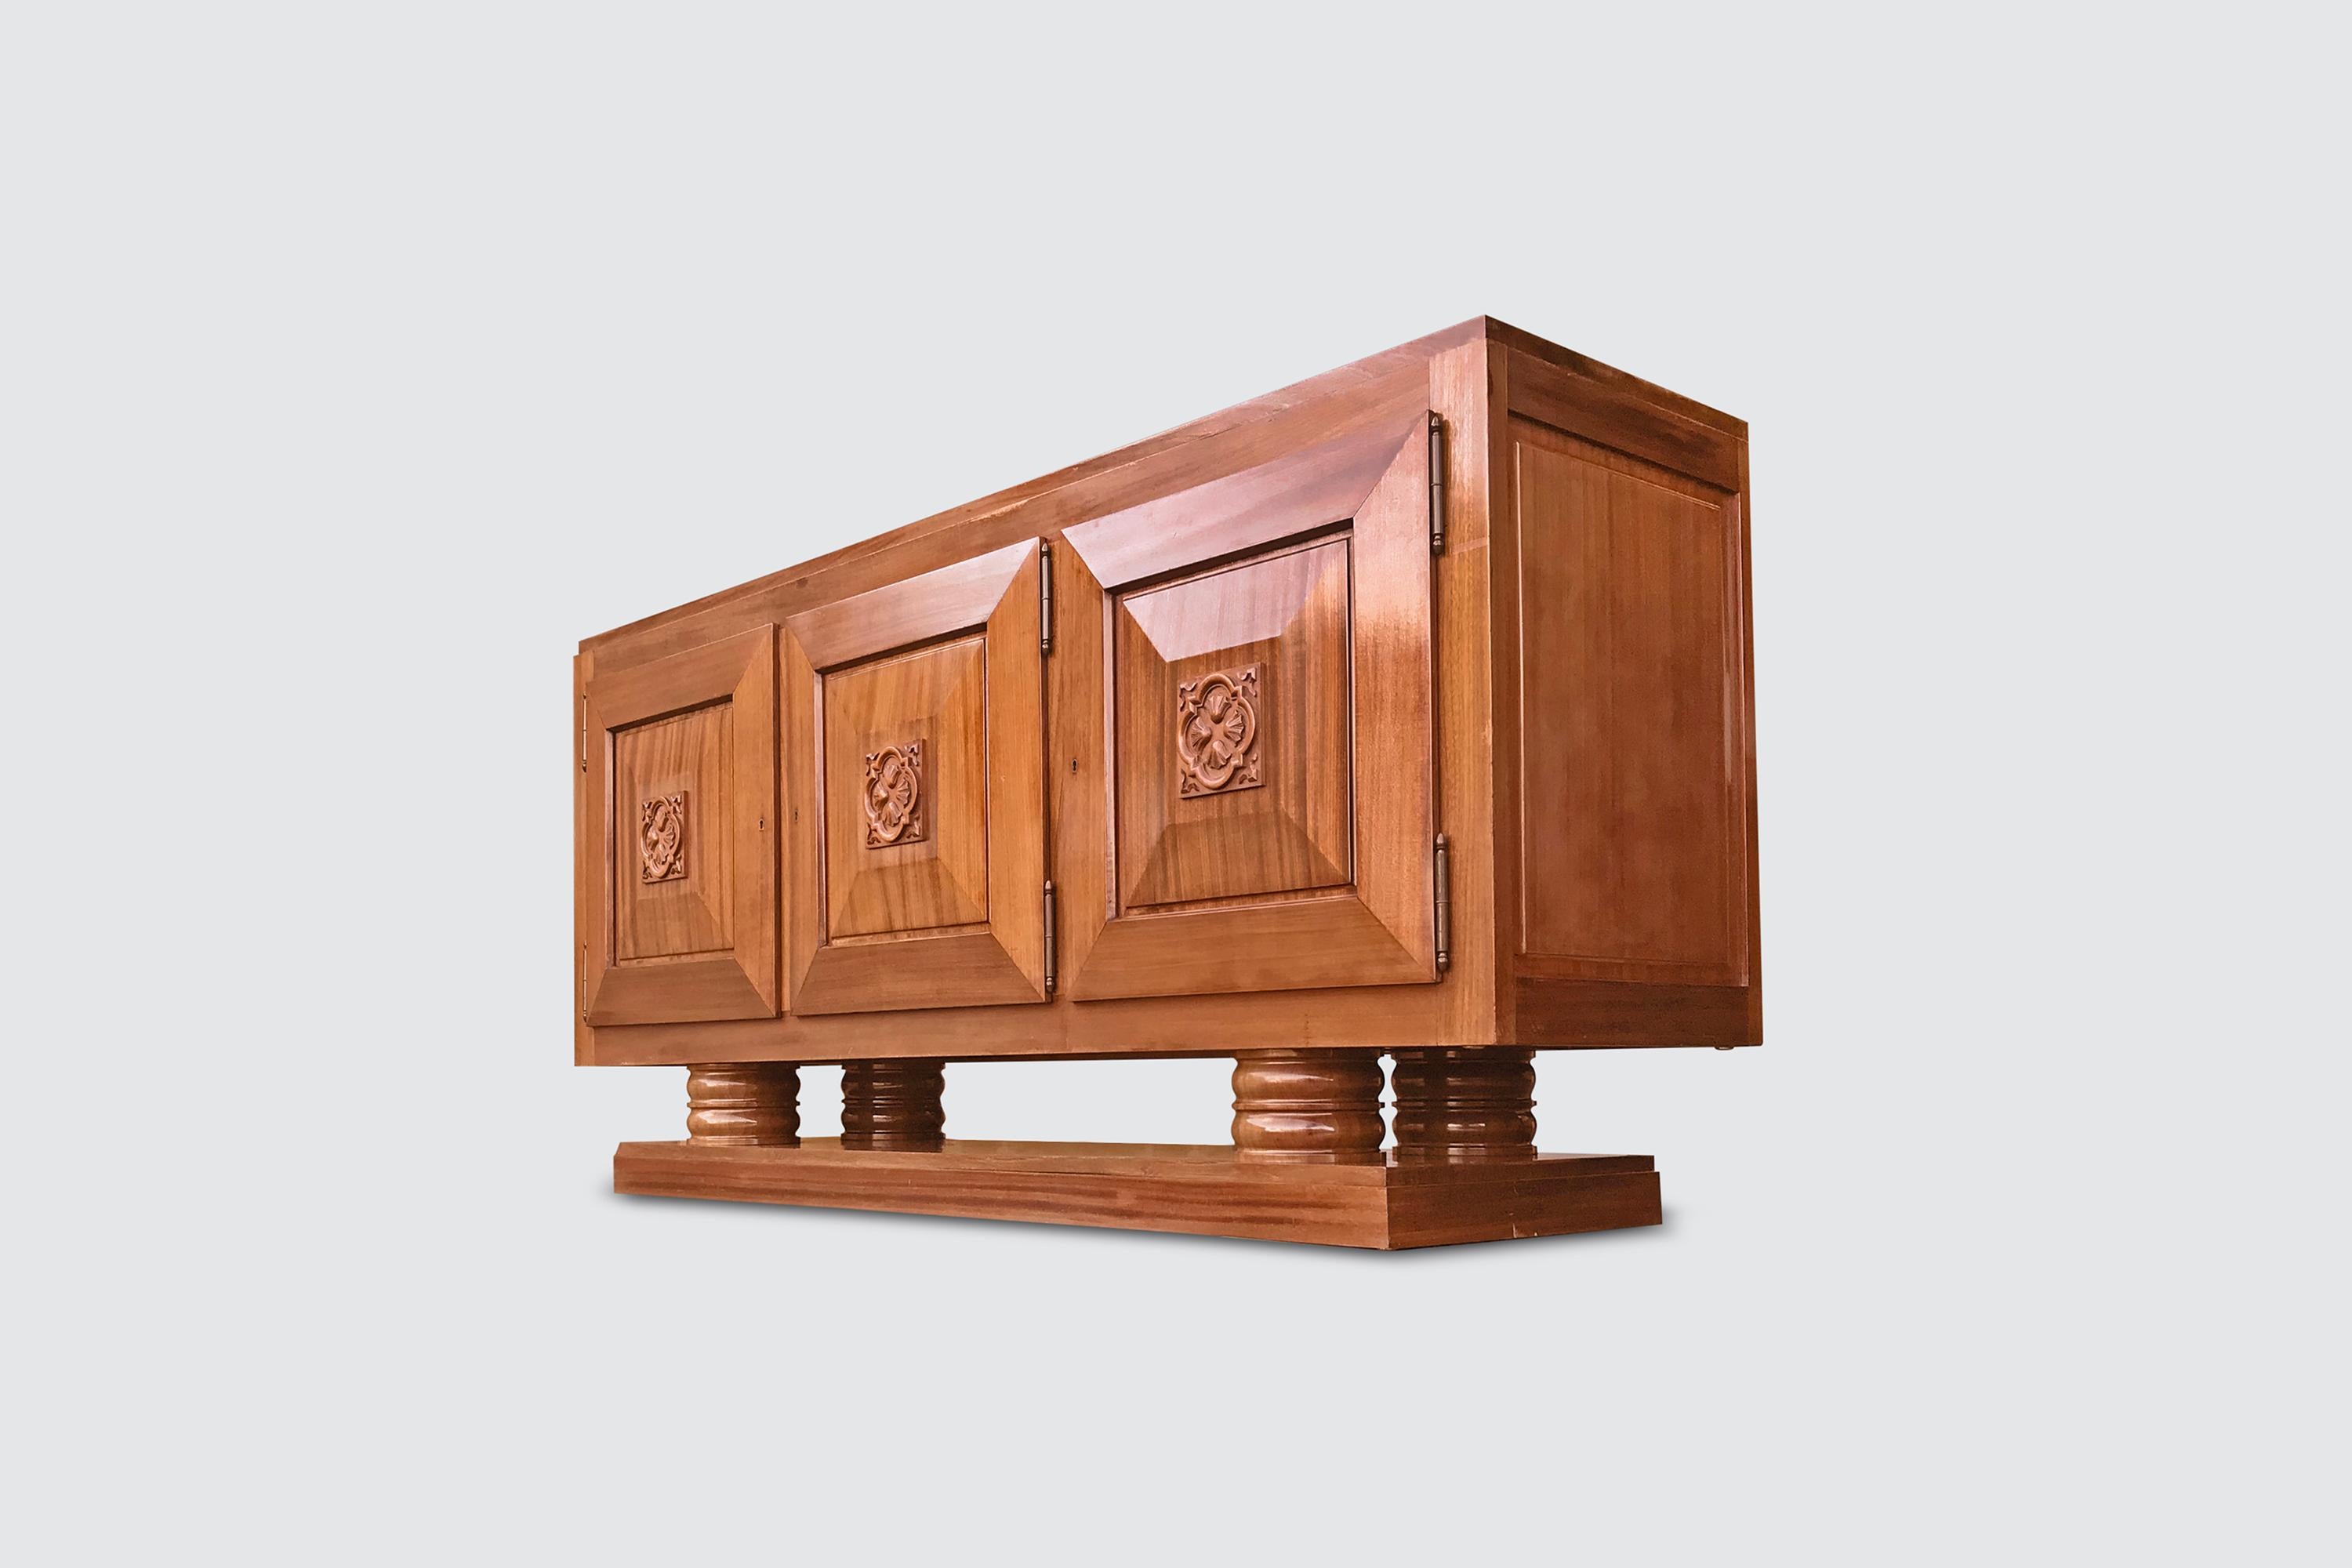 French Sculpted Mahogany Art Deco Credenza by Gaston Poisson, France, 1930s For Sale